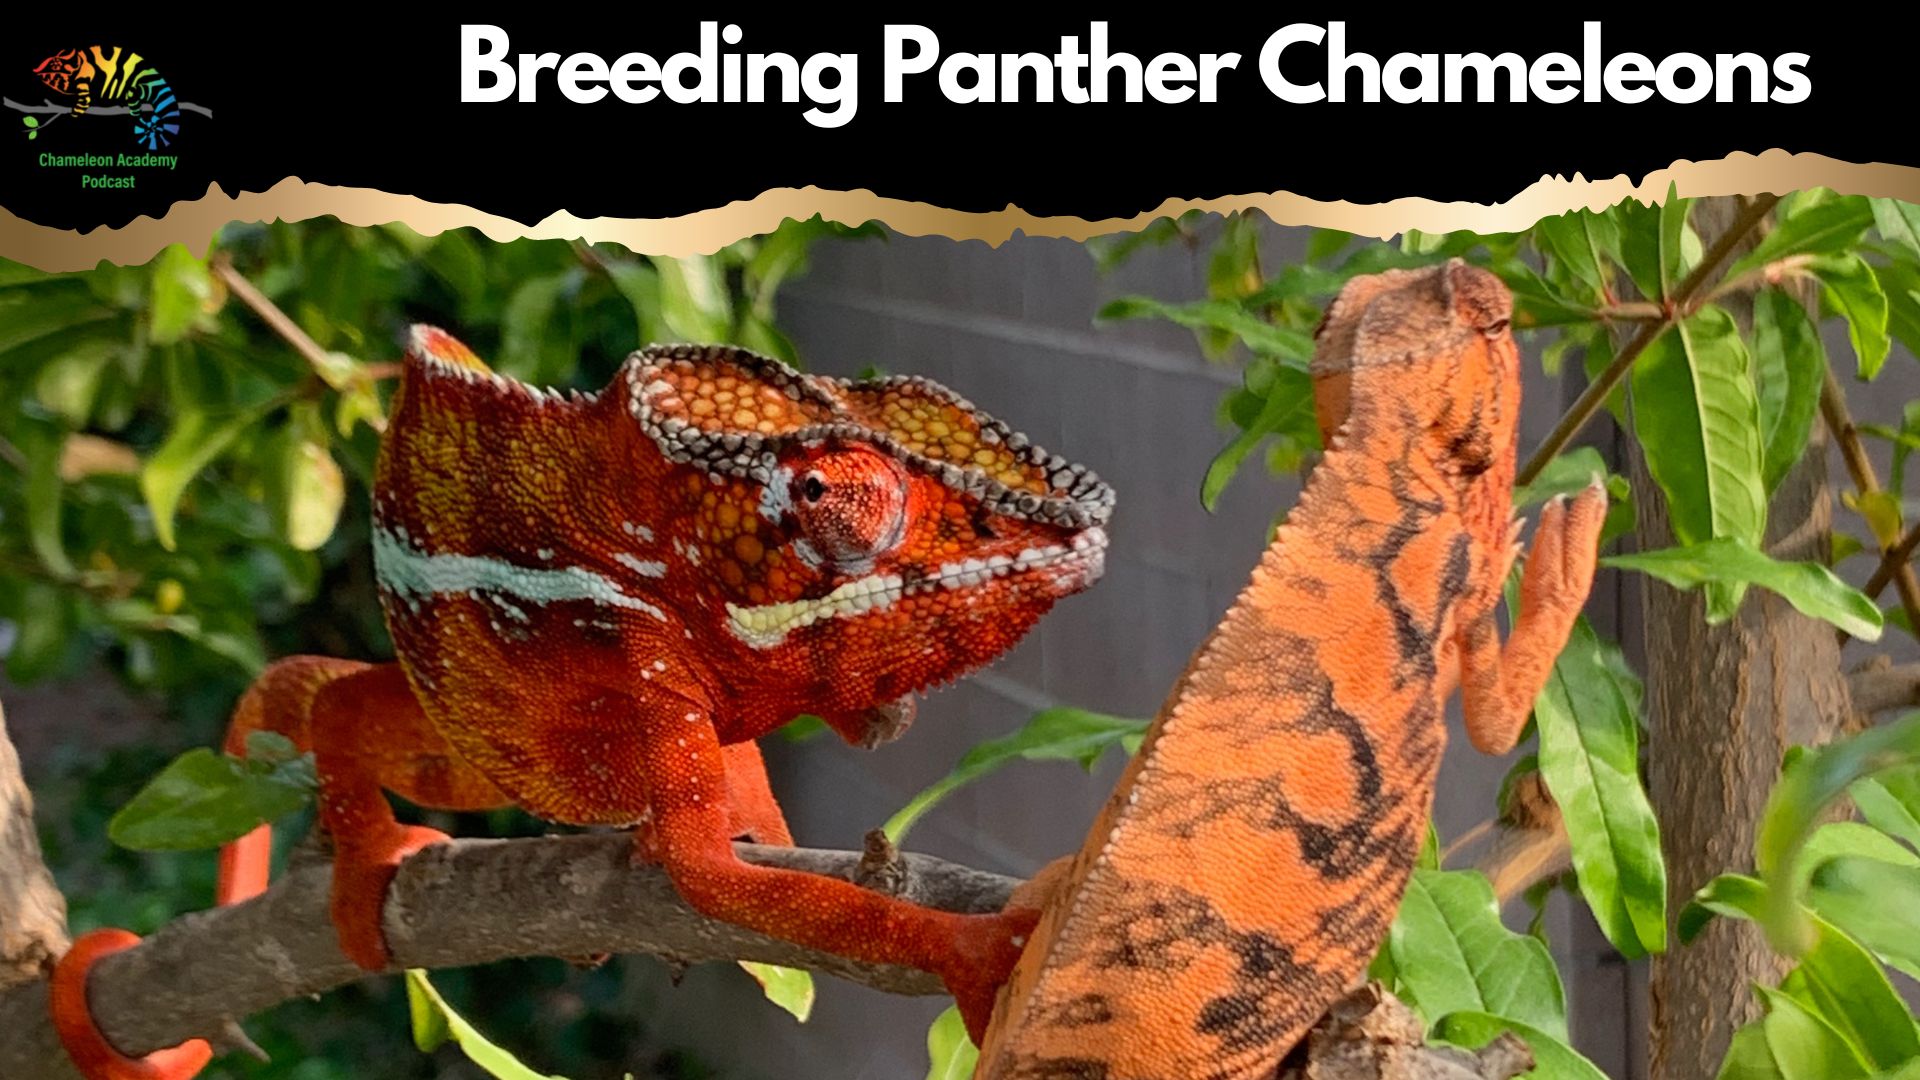 How to Breed Panther Chameleons?